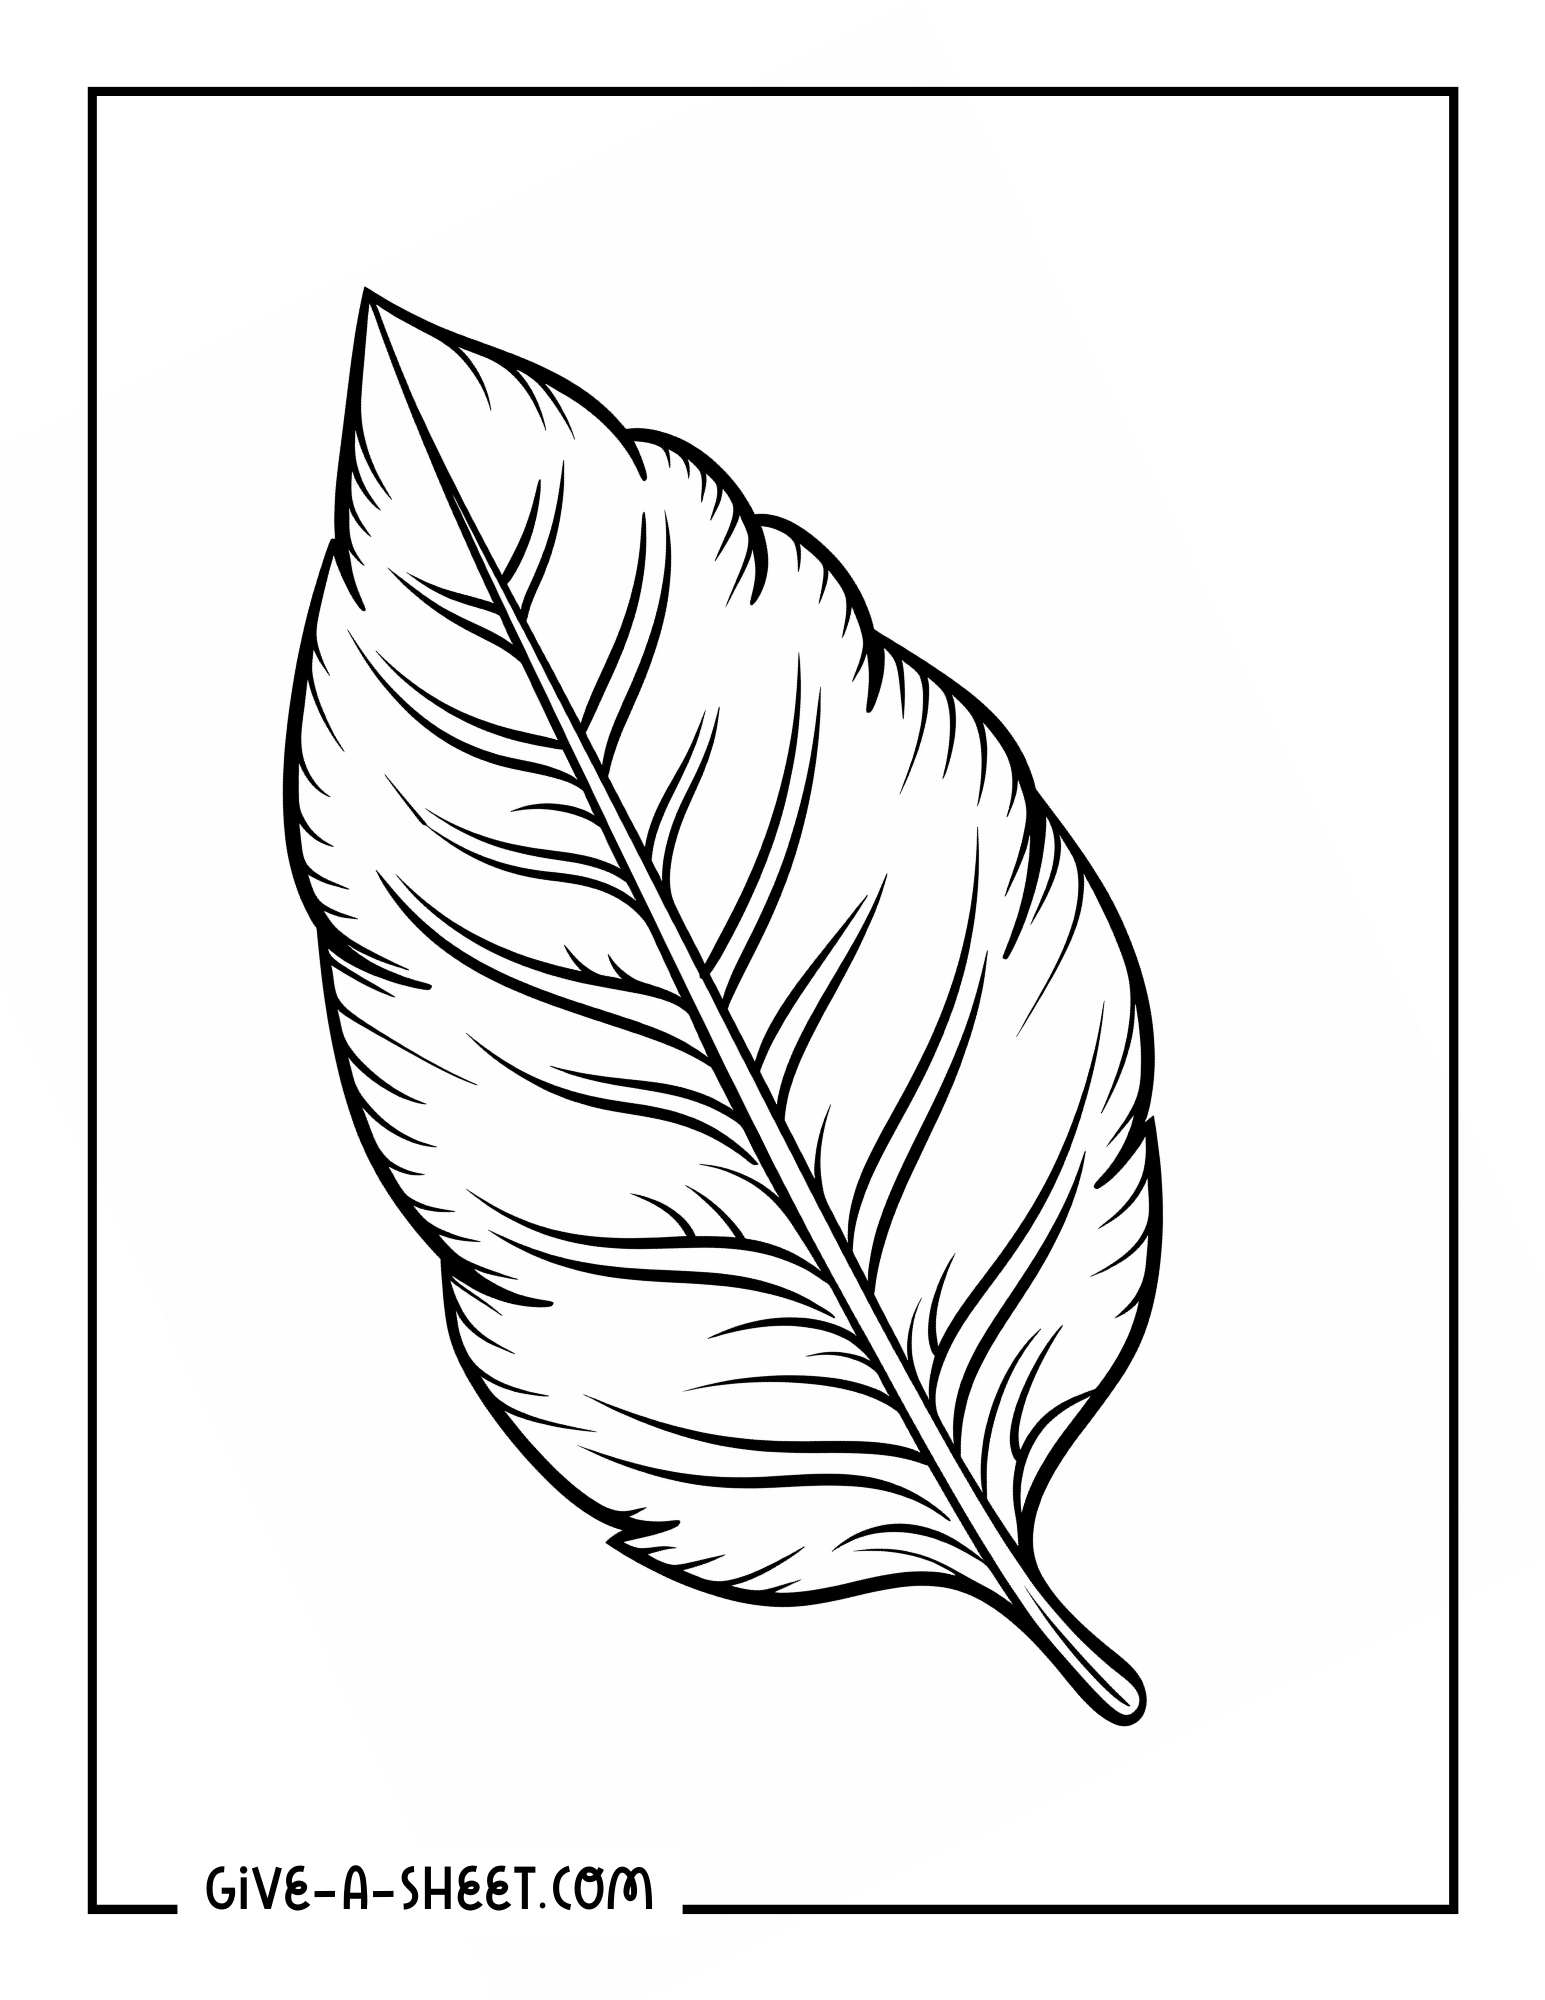 Chestnut leaf fall coloring page for kids.